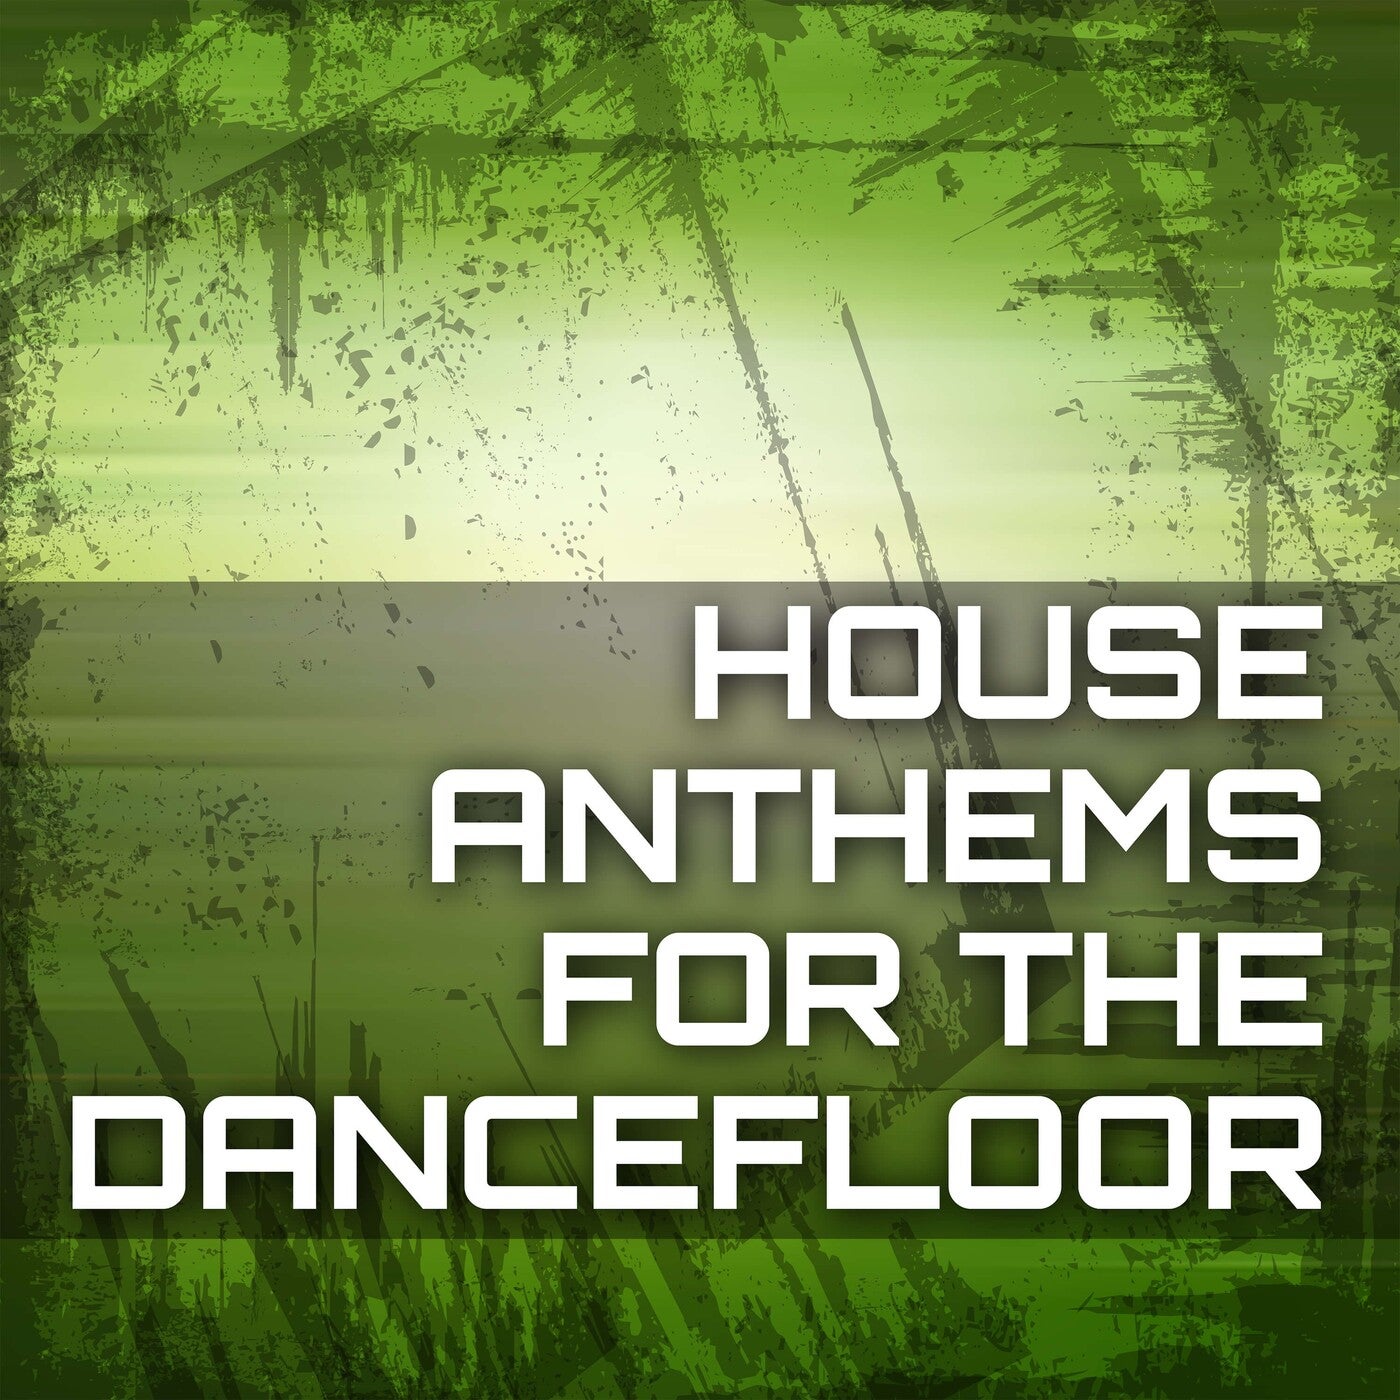 House Anthems for the Dancefloor